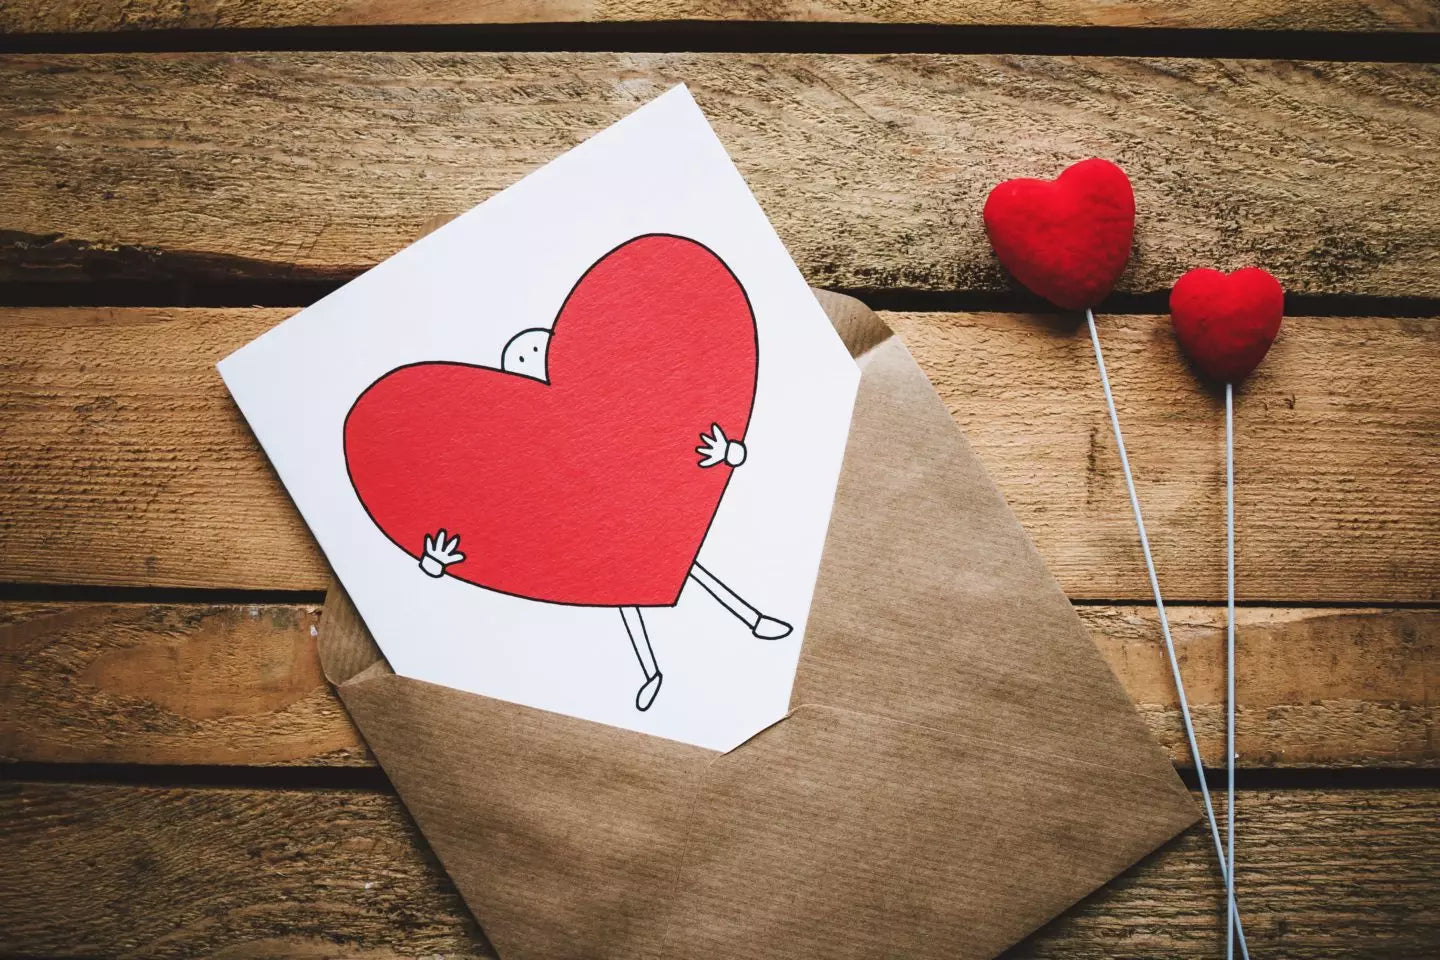 What are the most popular gifts to send for Valentine's Day?